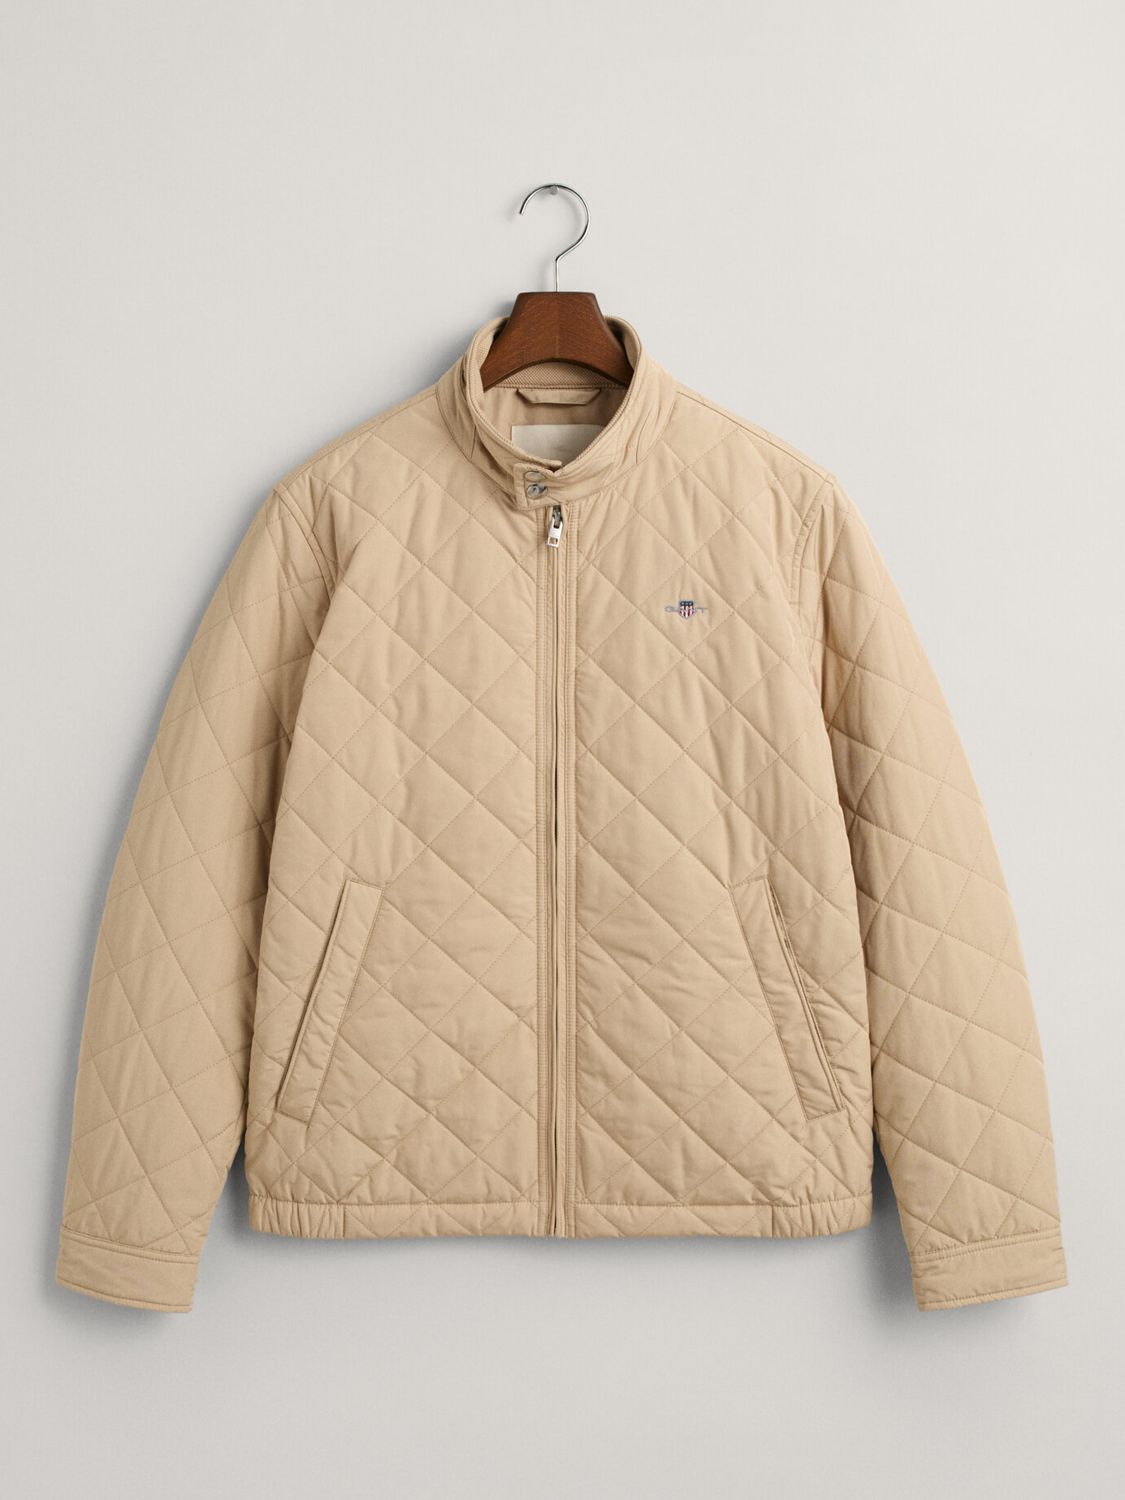 GANT Quilted Jacket, Dry Sand at John &